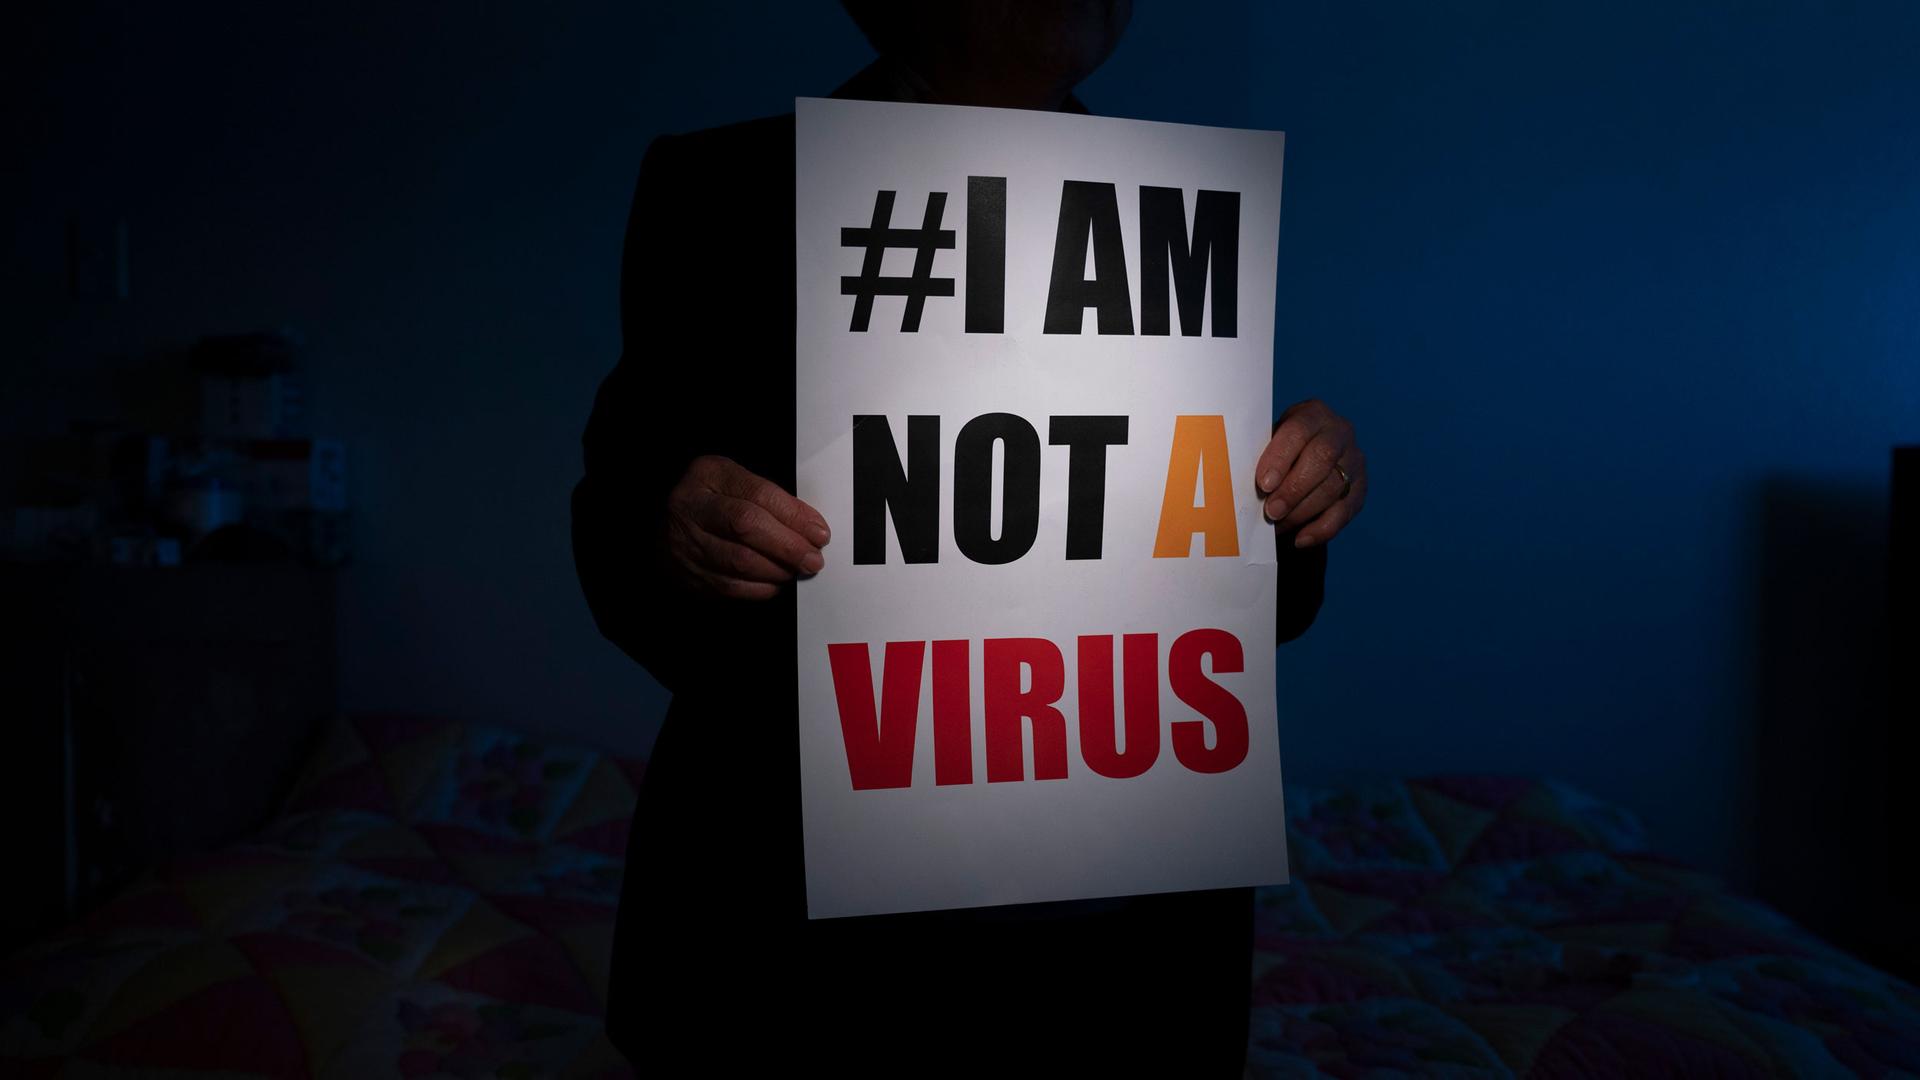 A person is shown in shadow and holding a placard with "#I am not a virus" printed on it.